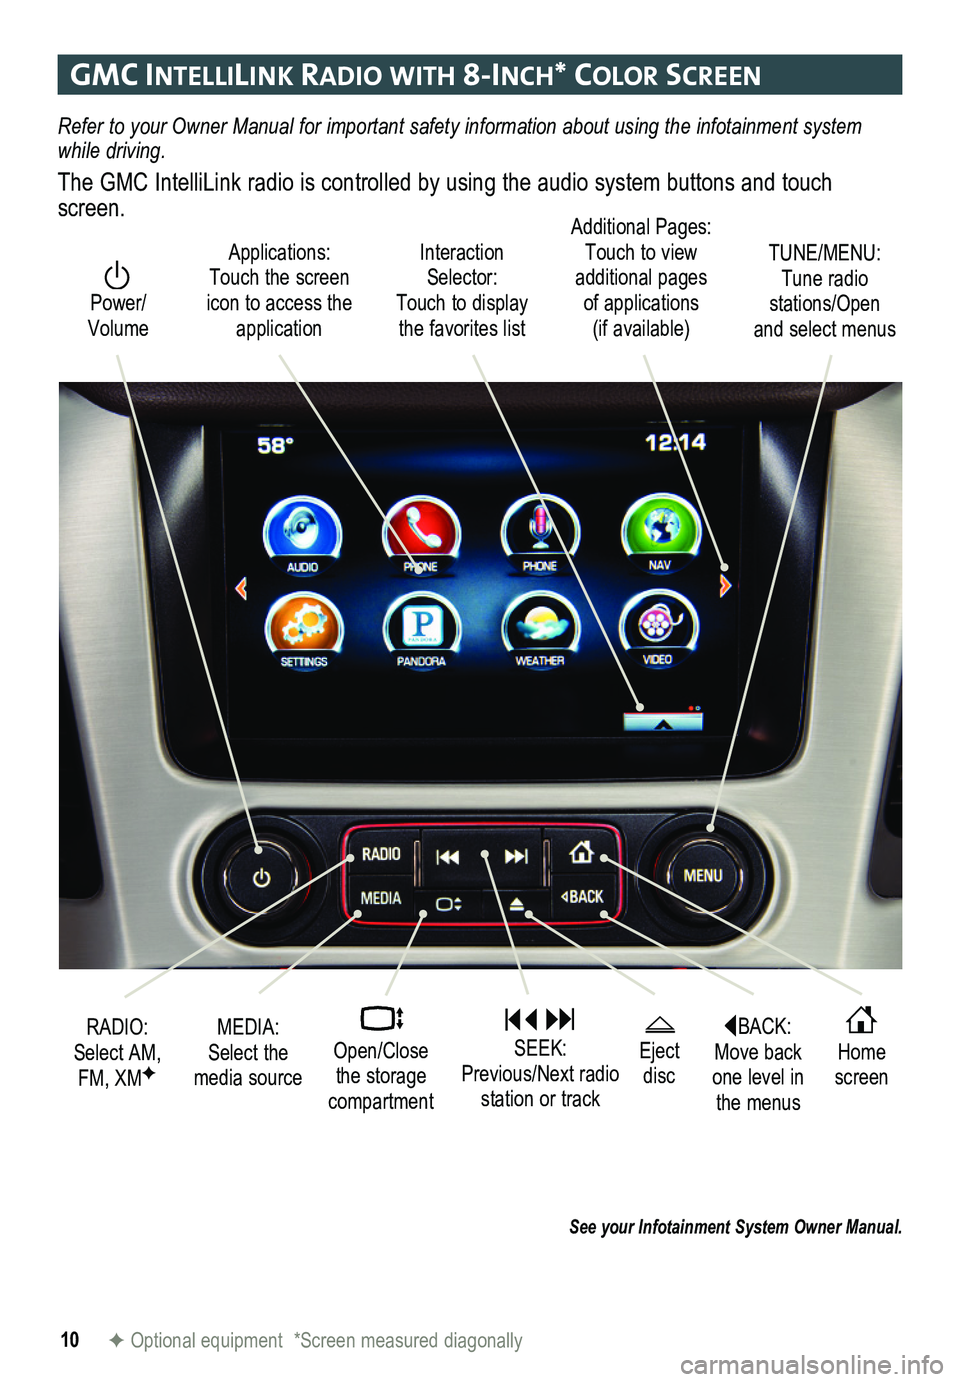 GMC YUKON 2015  Get To Know Guide 10
gmc IntellIlIn K raDIo w Ith 8-Inch* color screen
Refer to your Owner Manual for important safety information about using \
the infotainment system while driving. 
The GMC IntelliLink radio is cont